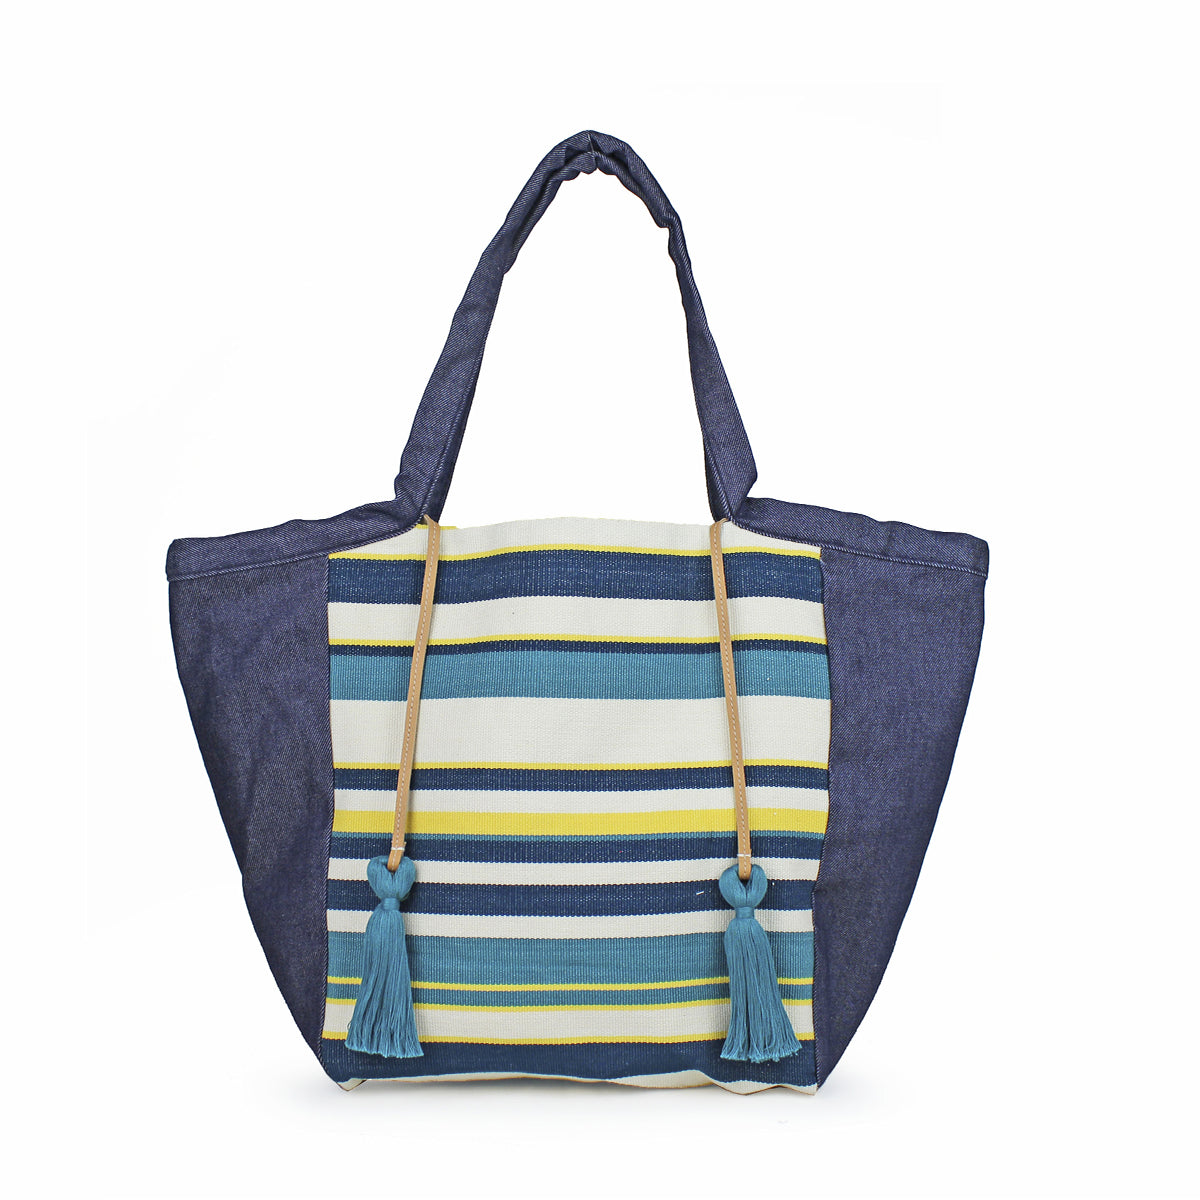 Artisan Rosa Handwoven Tote in Denim Pacific. The bag has a horizontal dark blue, turquoise, lemon yellow, and white striped pattern. It has dark wash denim sides. It has two turquoise tassels attached to leather cords.